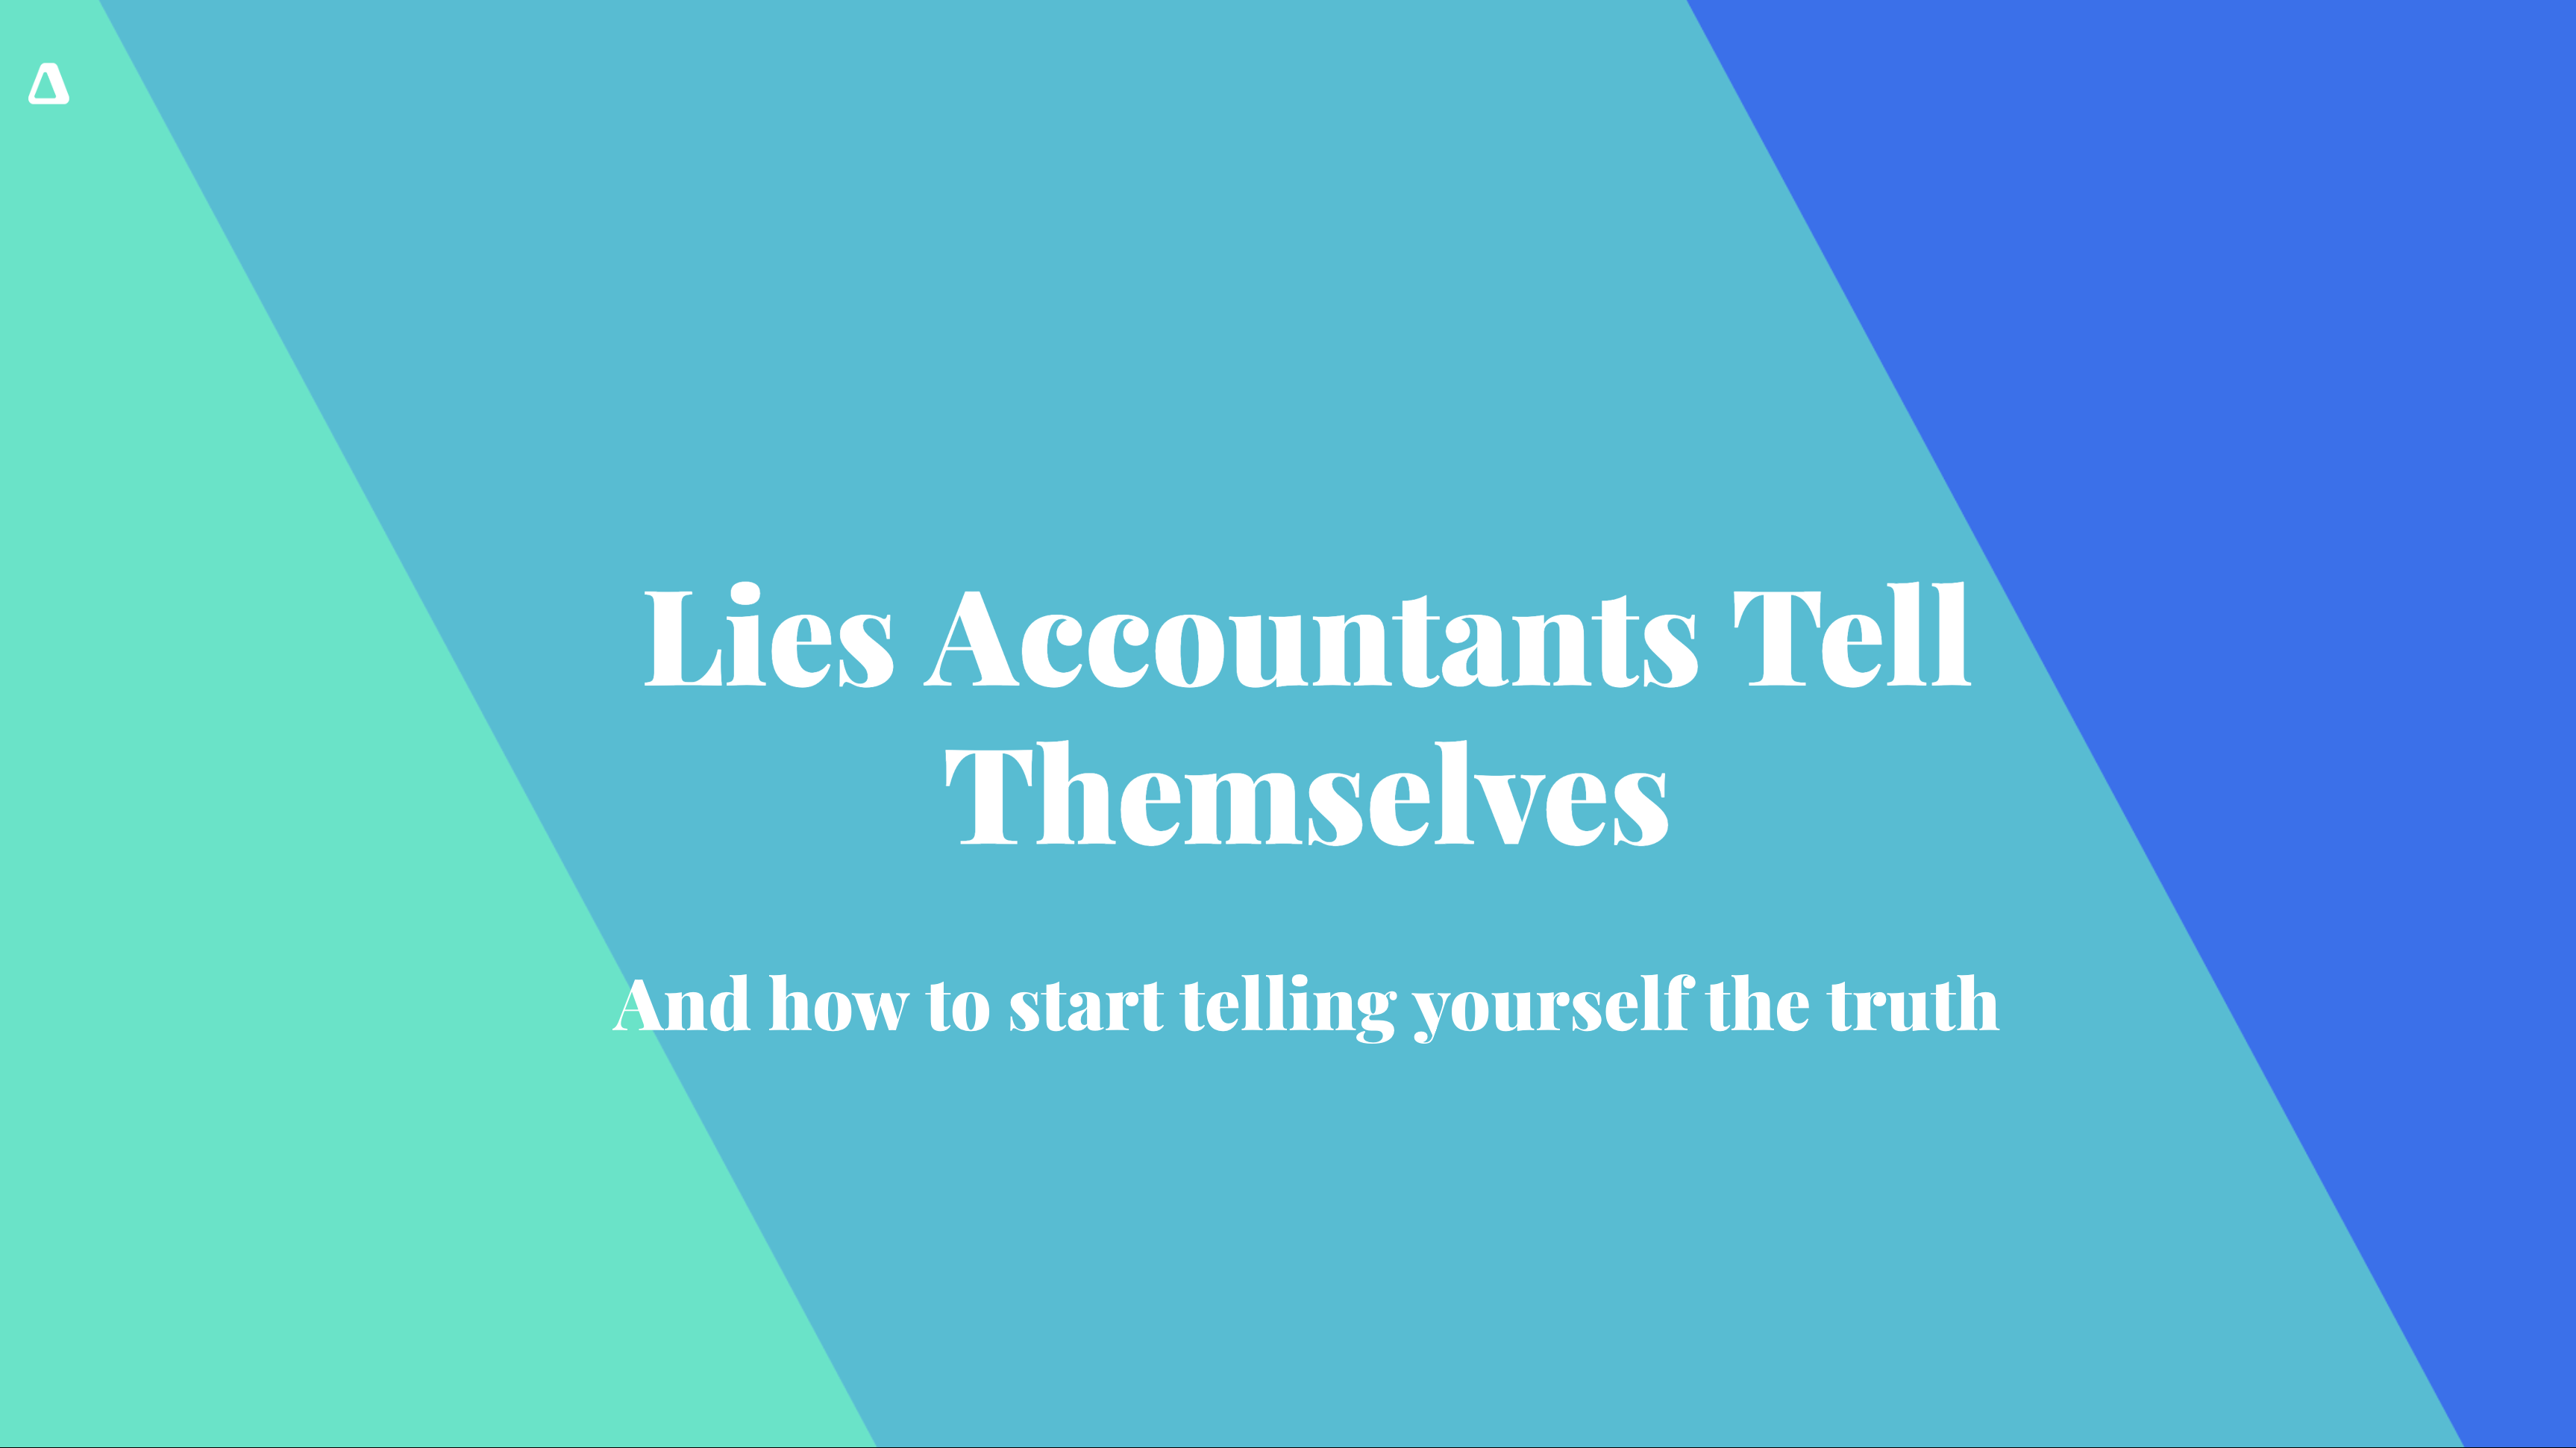 Lies Accountants Tell Themselves